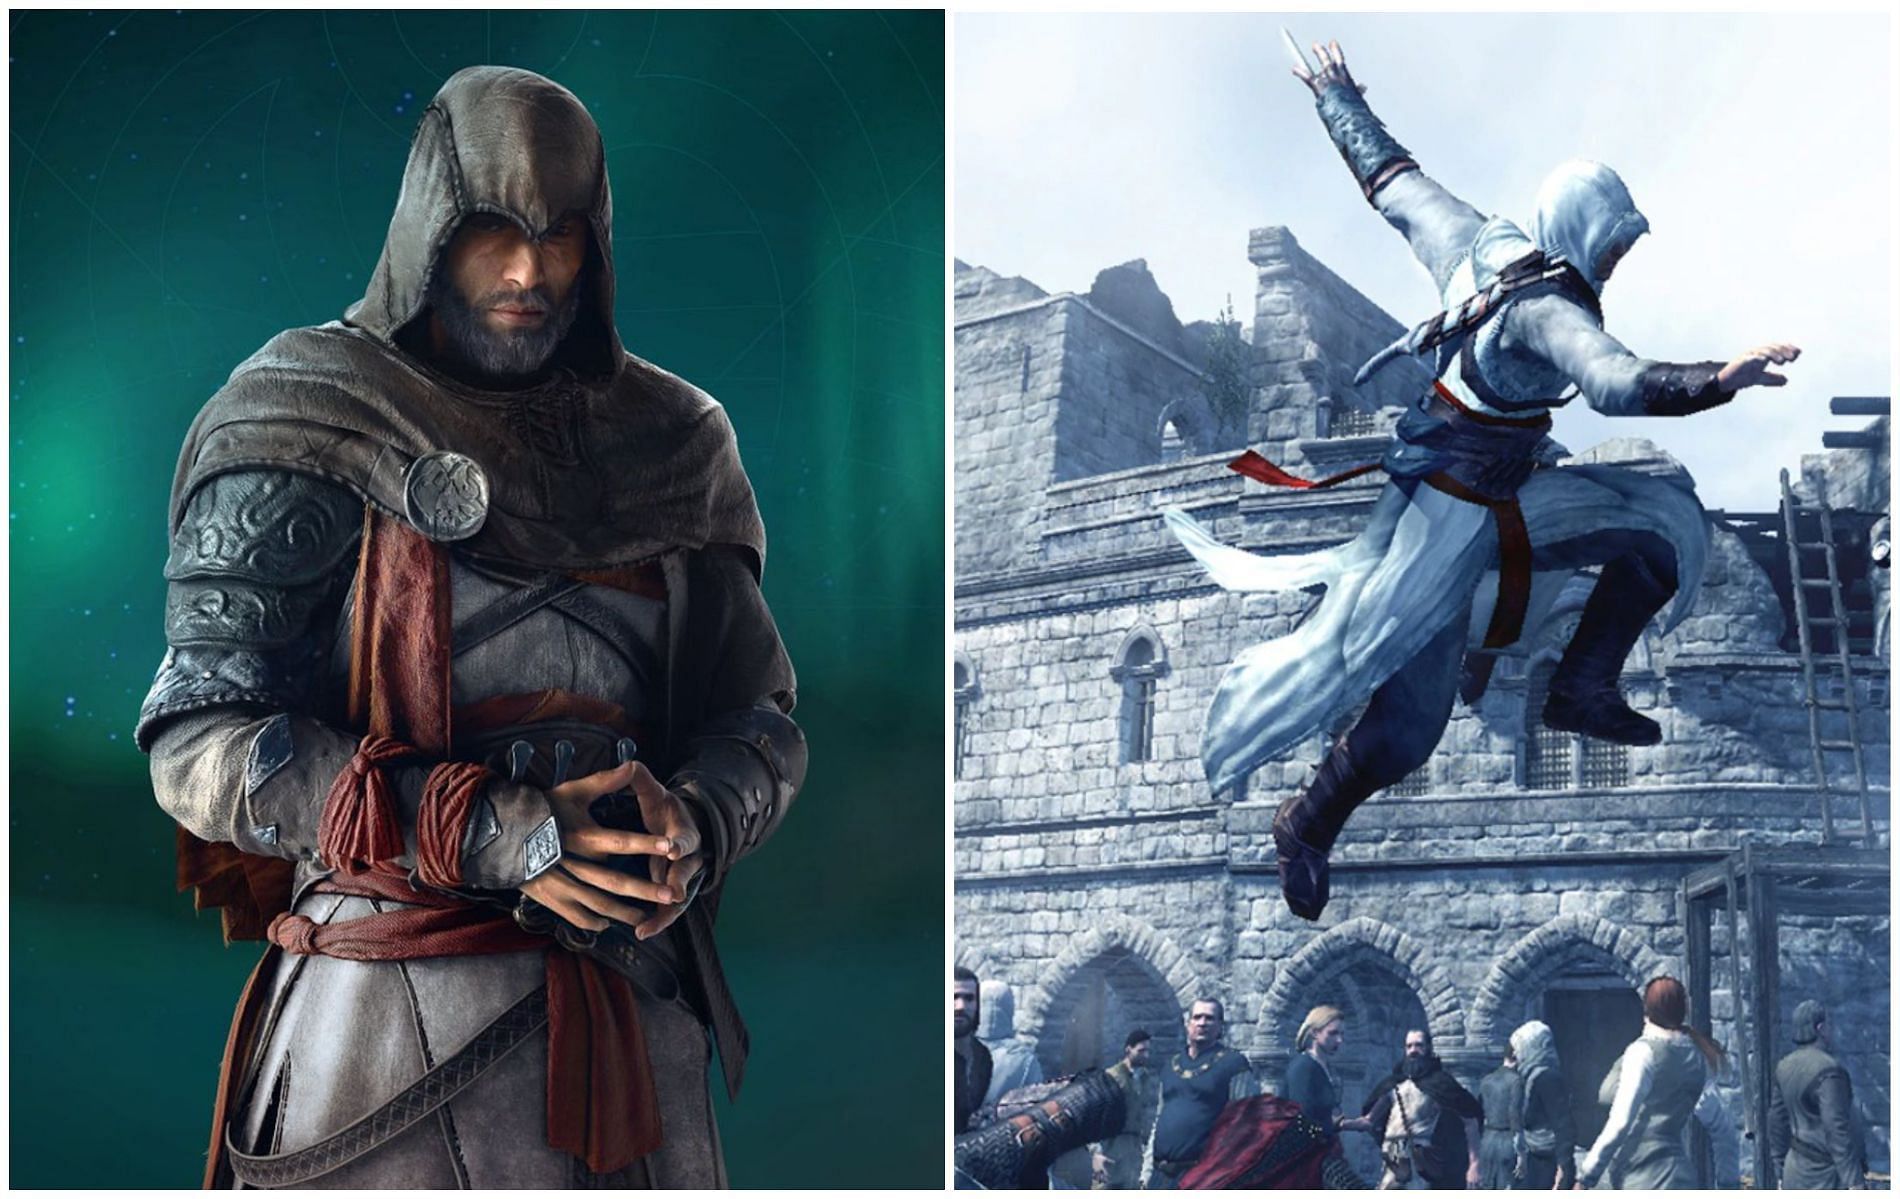 Ubisoft developer RECONFIRMS that Assassin's Creed Valhalla will